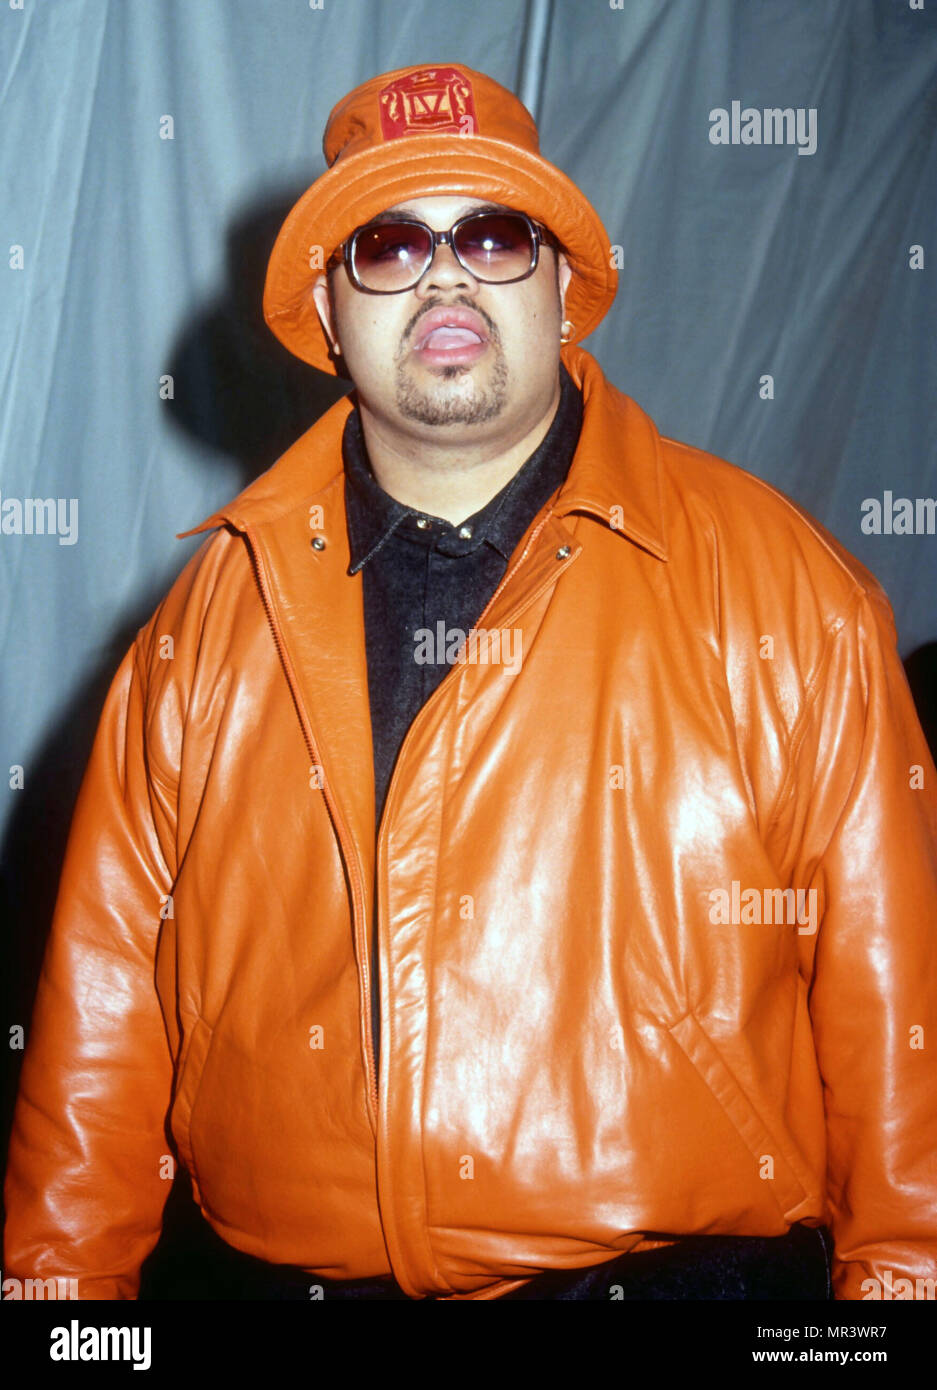 LOS ANGELES, CA - MARCH 12: Rapper Heavy D attends the Fifth